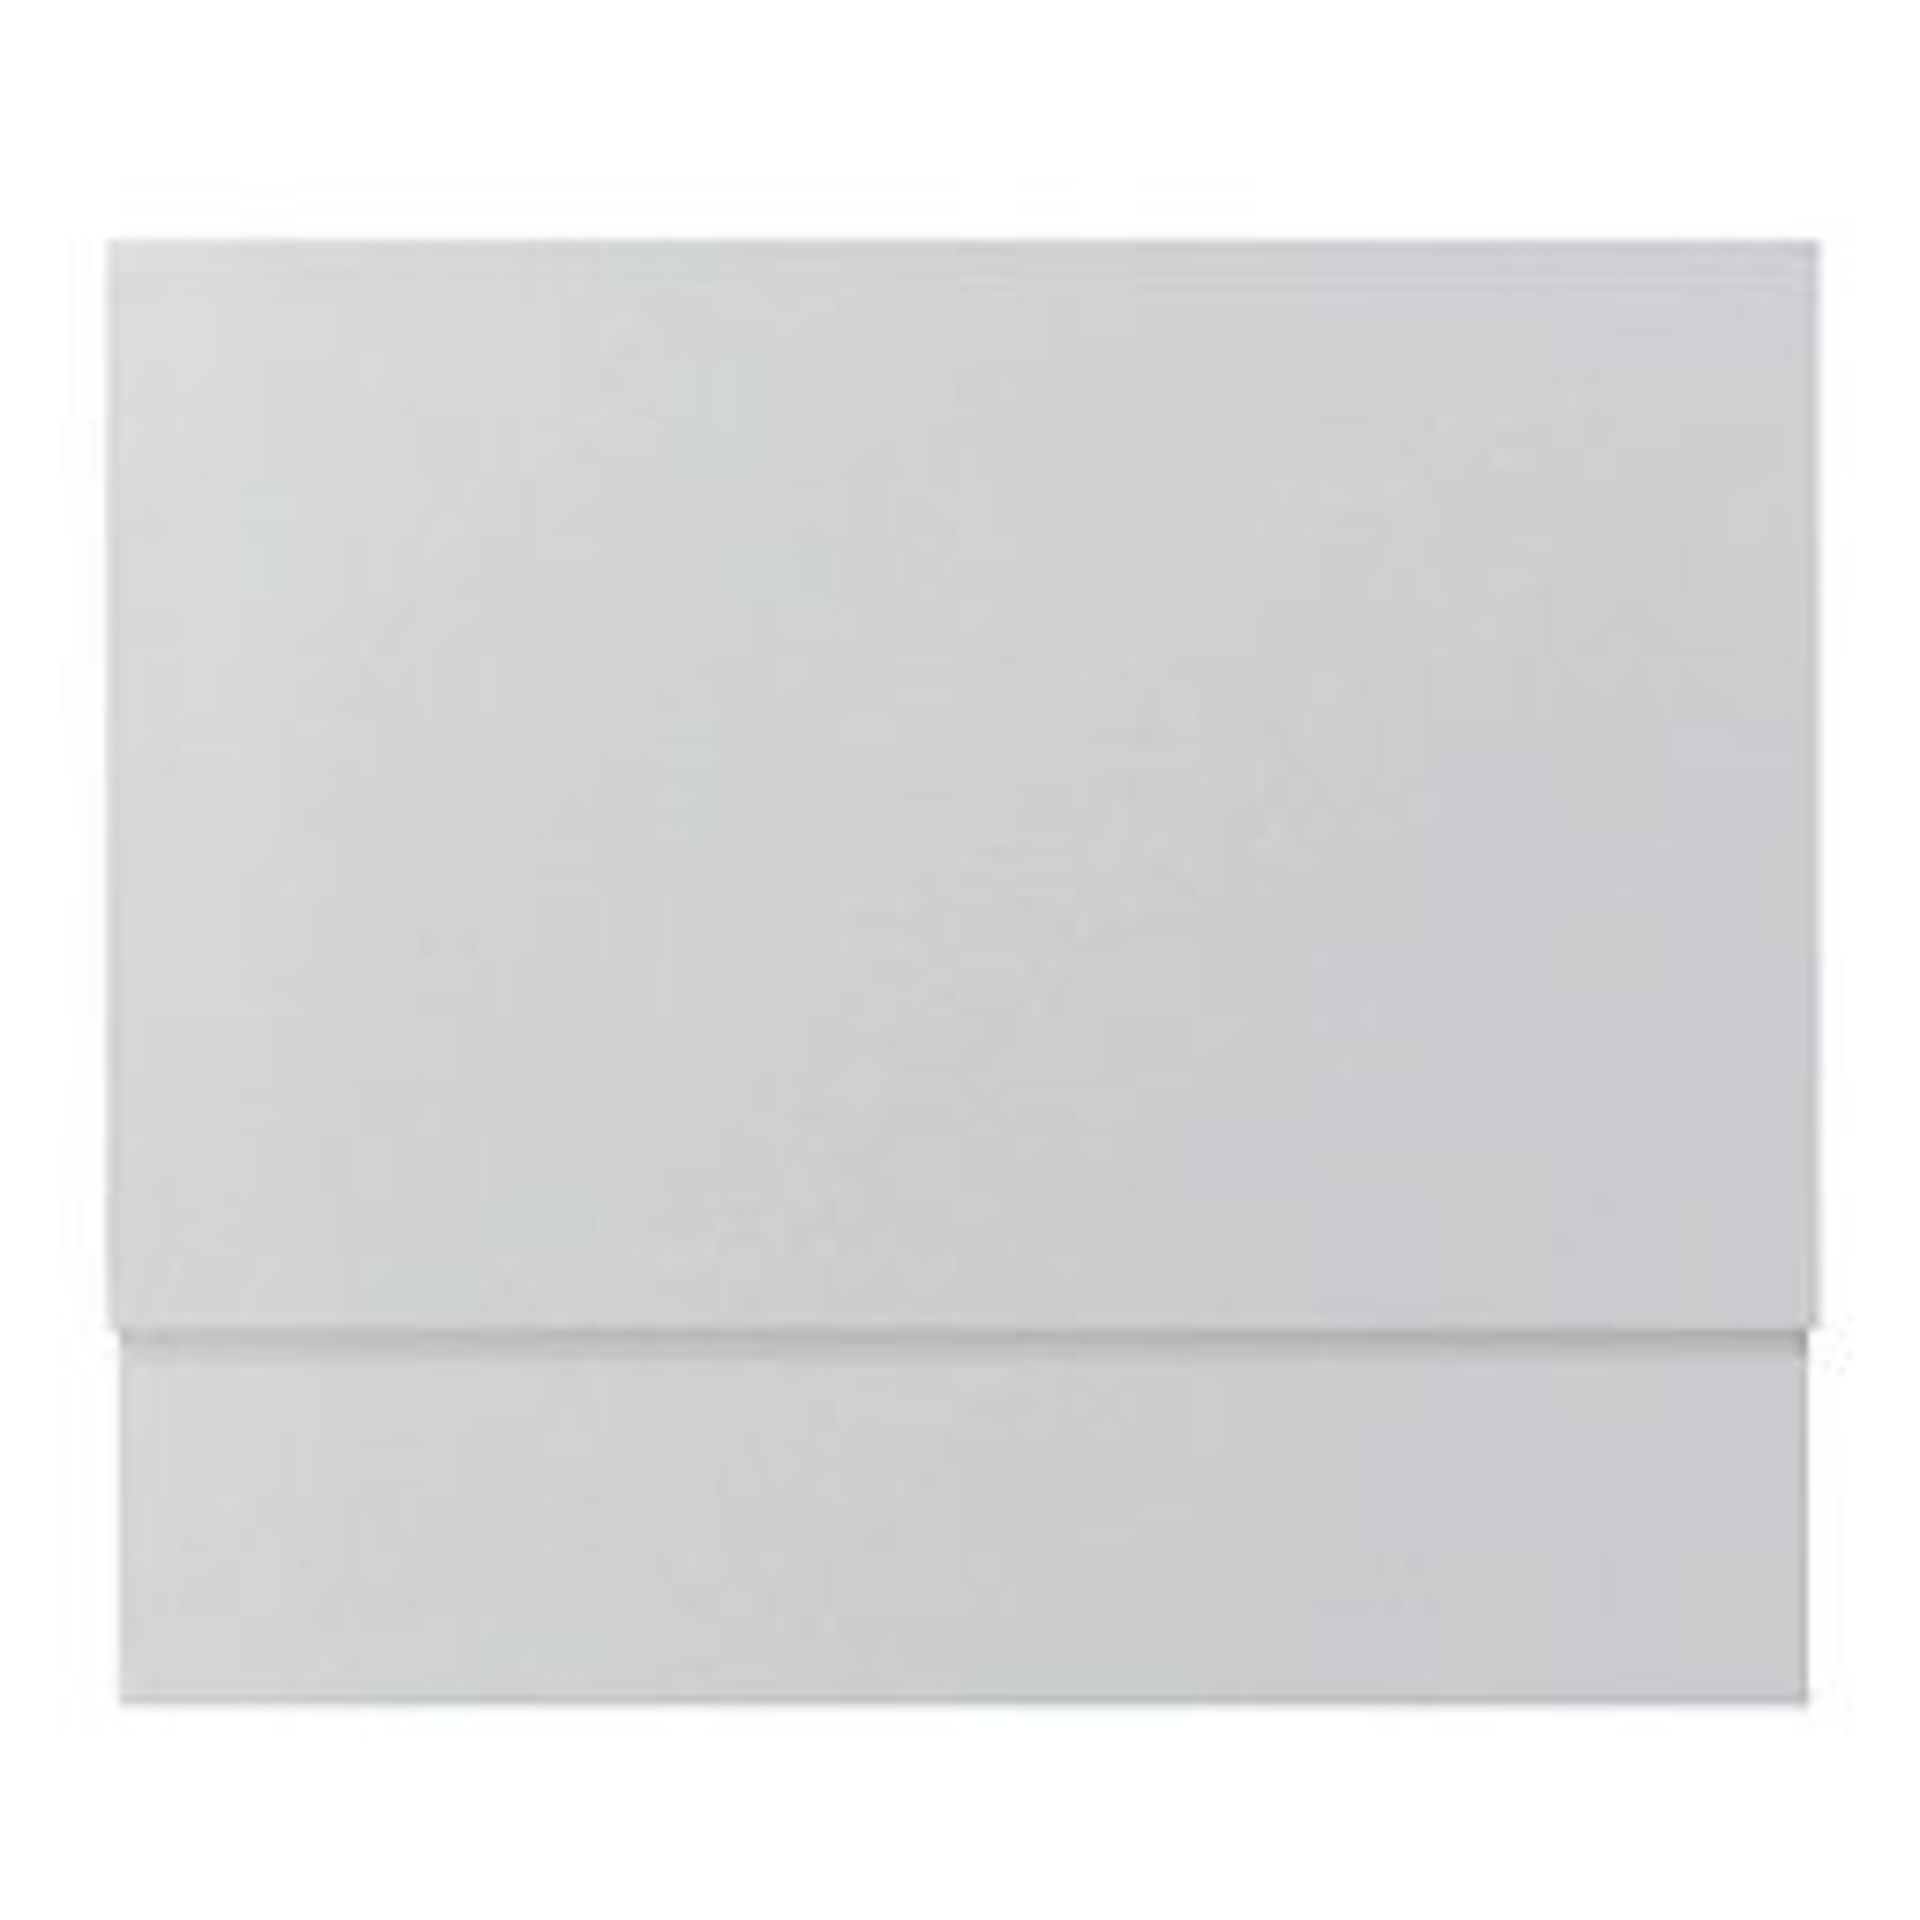 BATH END PANEL 700MM WHITE GLOSS. - R14.9. Contemporary bath end panel made from strong MDF and